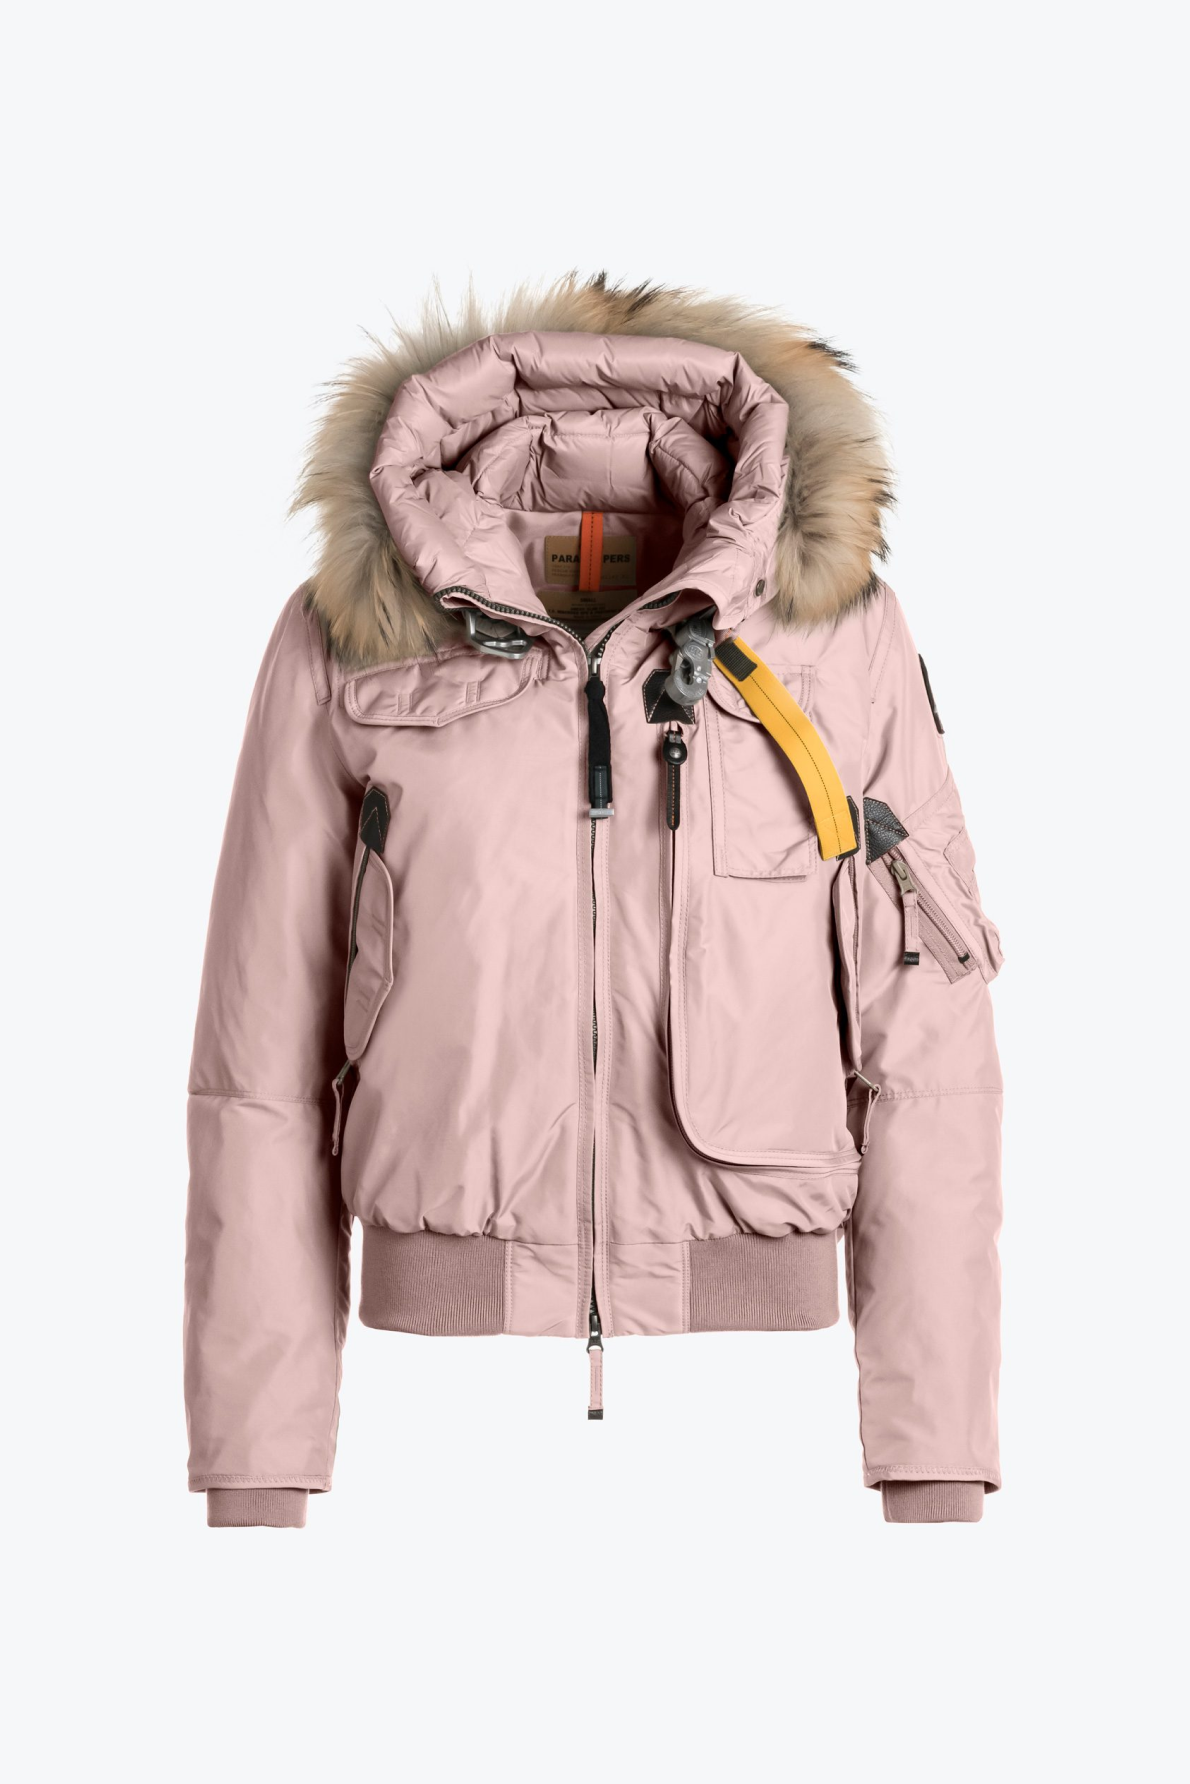 Parajumpers Gobi Women's Hooded Bomber Jacket Pink - Front View